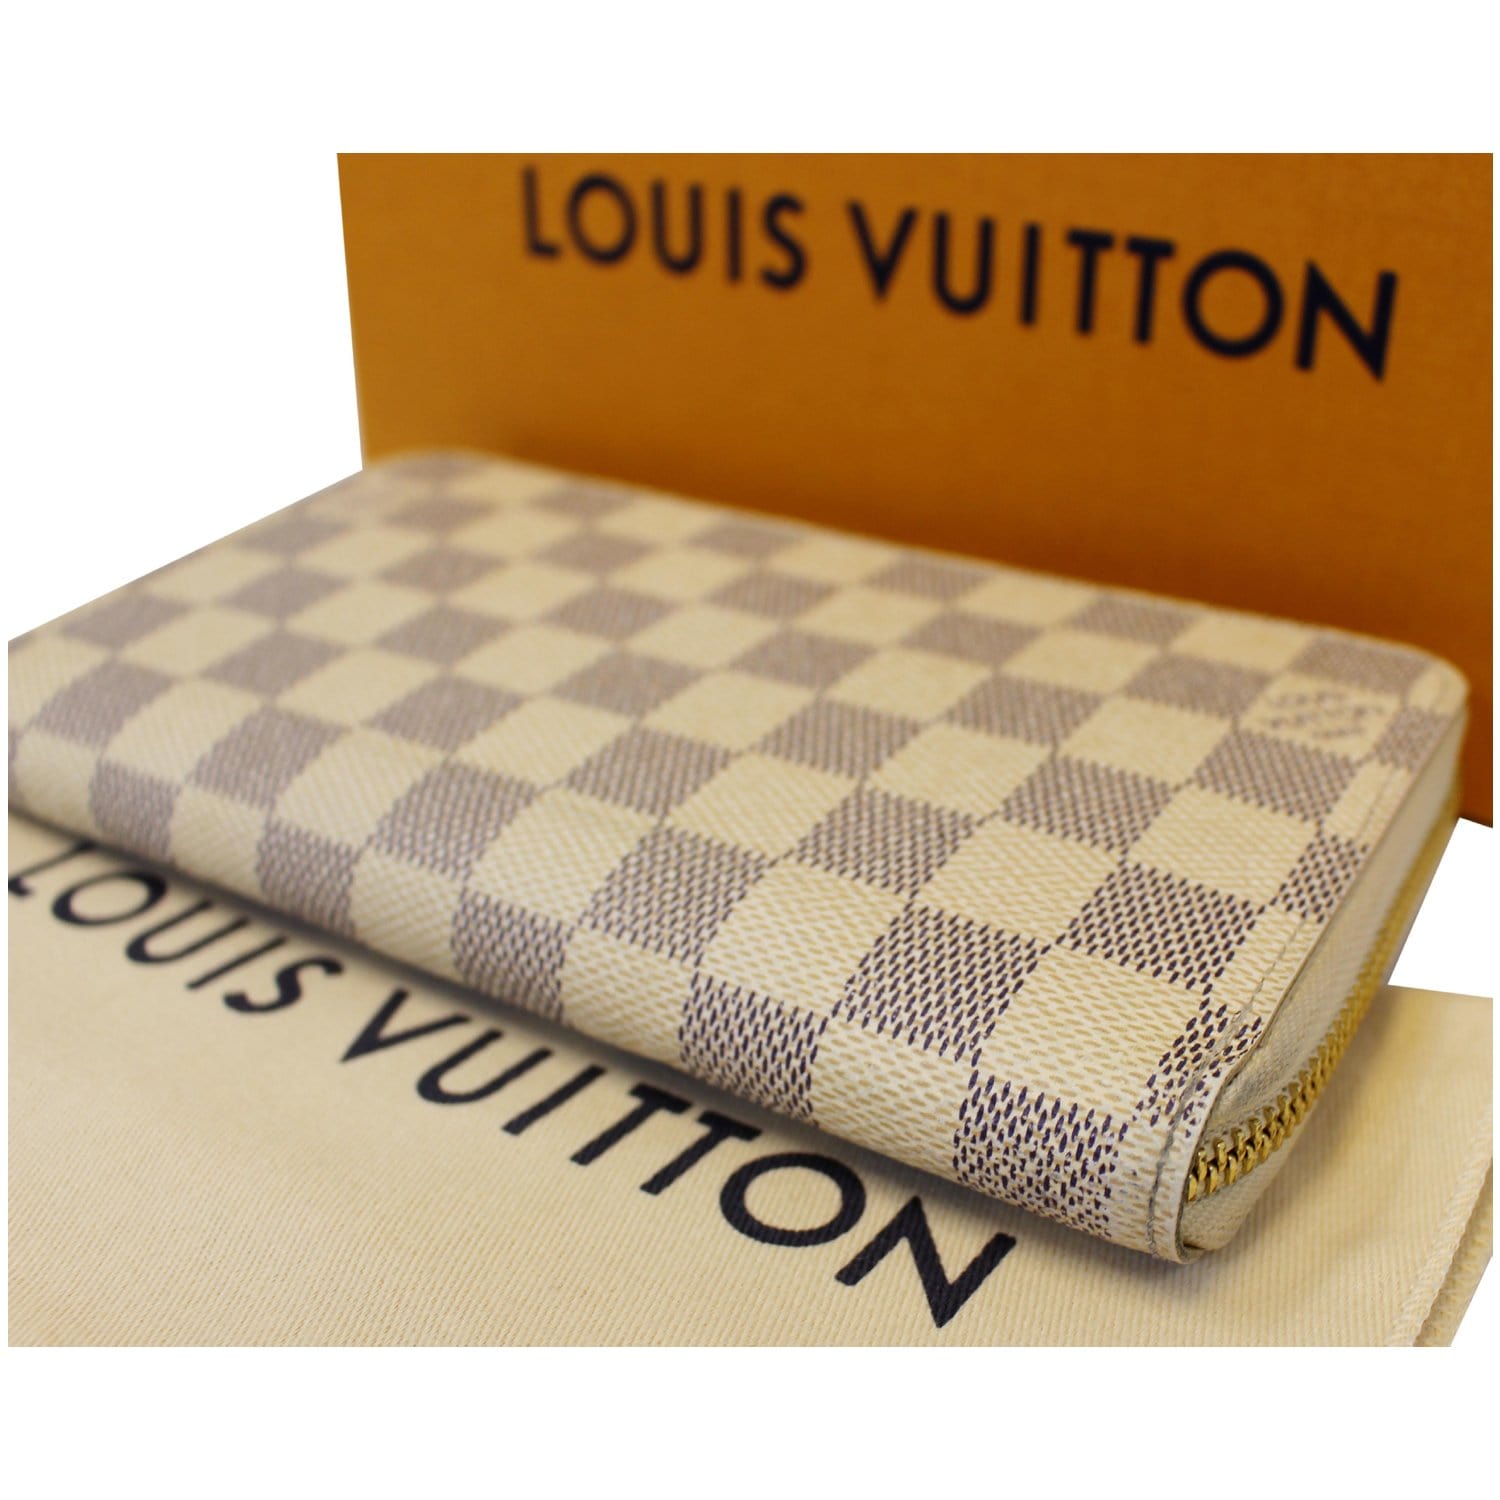 The Louis Vuitton Damier Graphite Giant Collection is One Subtle